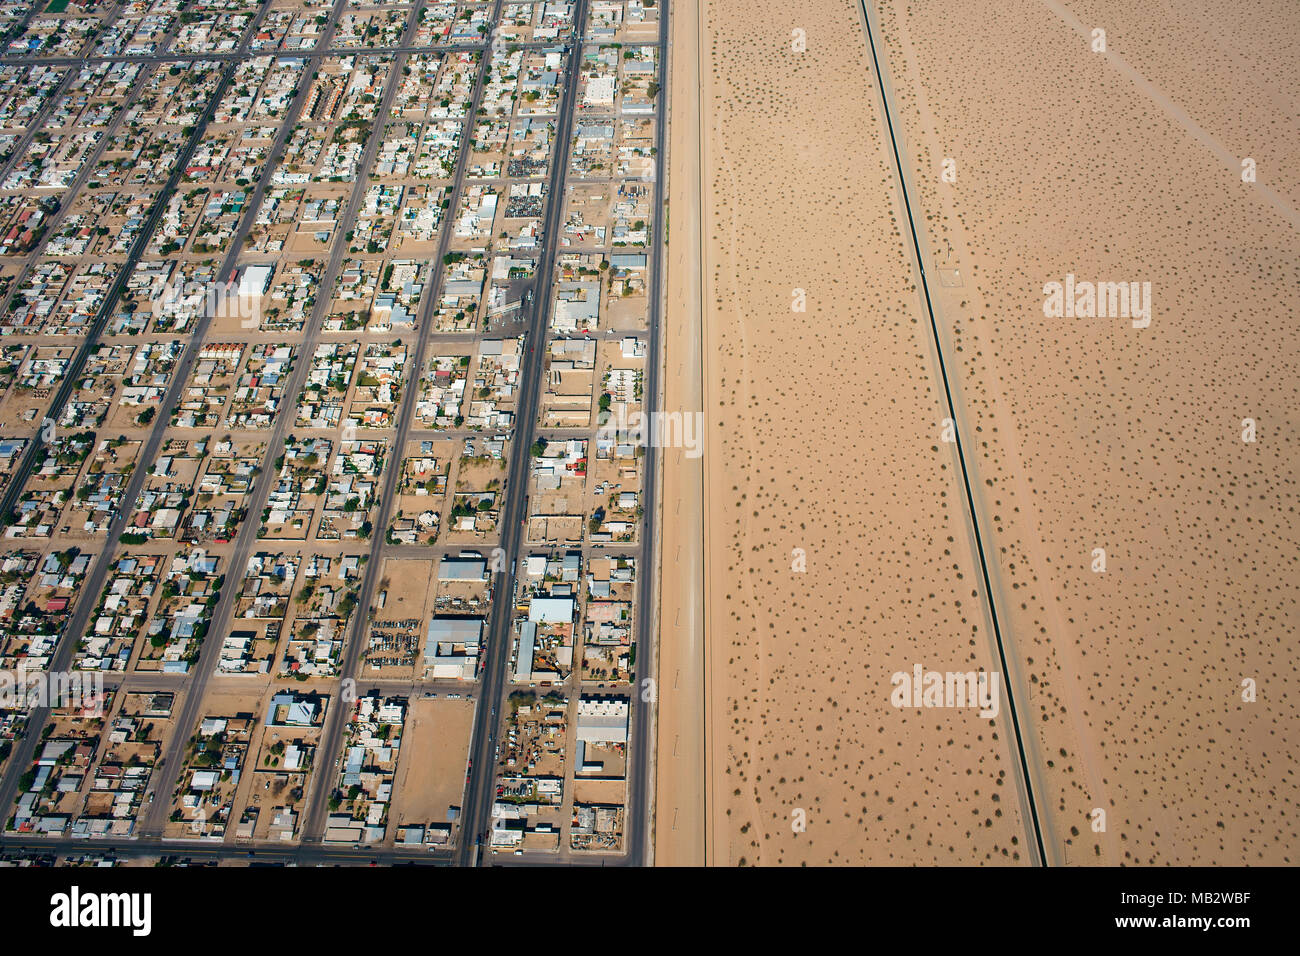 AERIAL VIEW. International border between Mexico and the United States. City of San Luis Rio Colorado in Sonora, stretching alongside the U.S. Border. Stock Photo